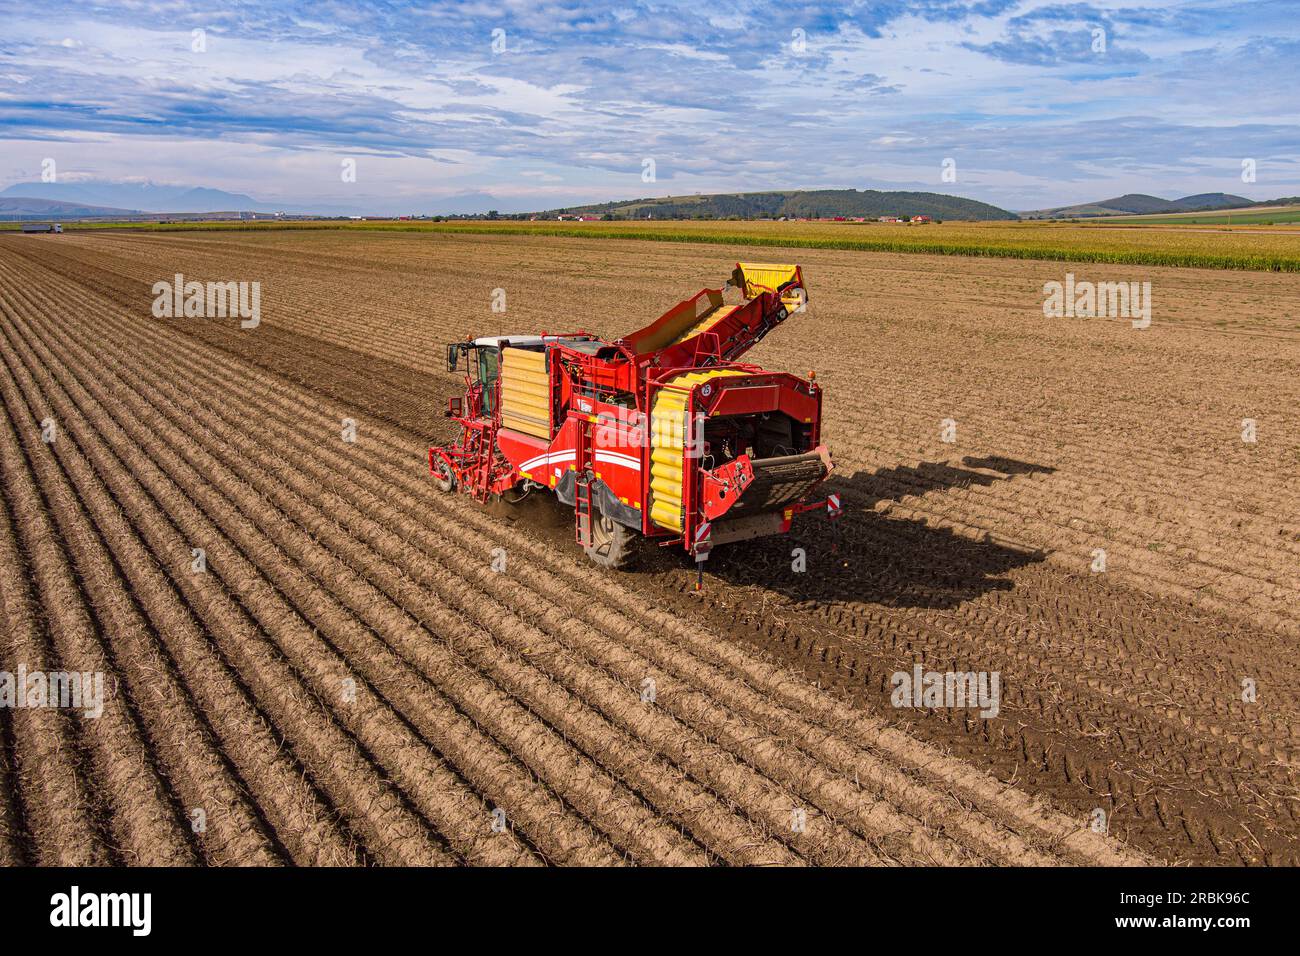 Large potato harvester pulled by a tractor processing a filed Stock Photo